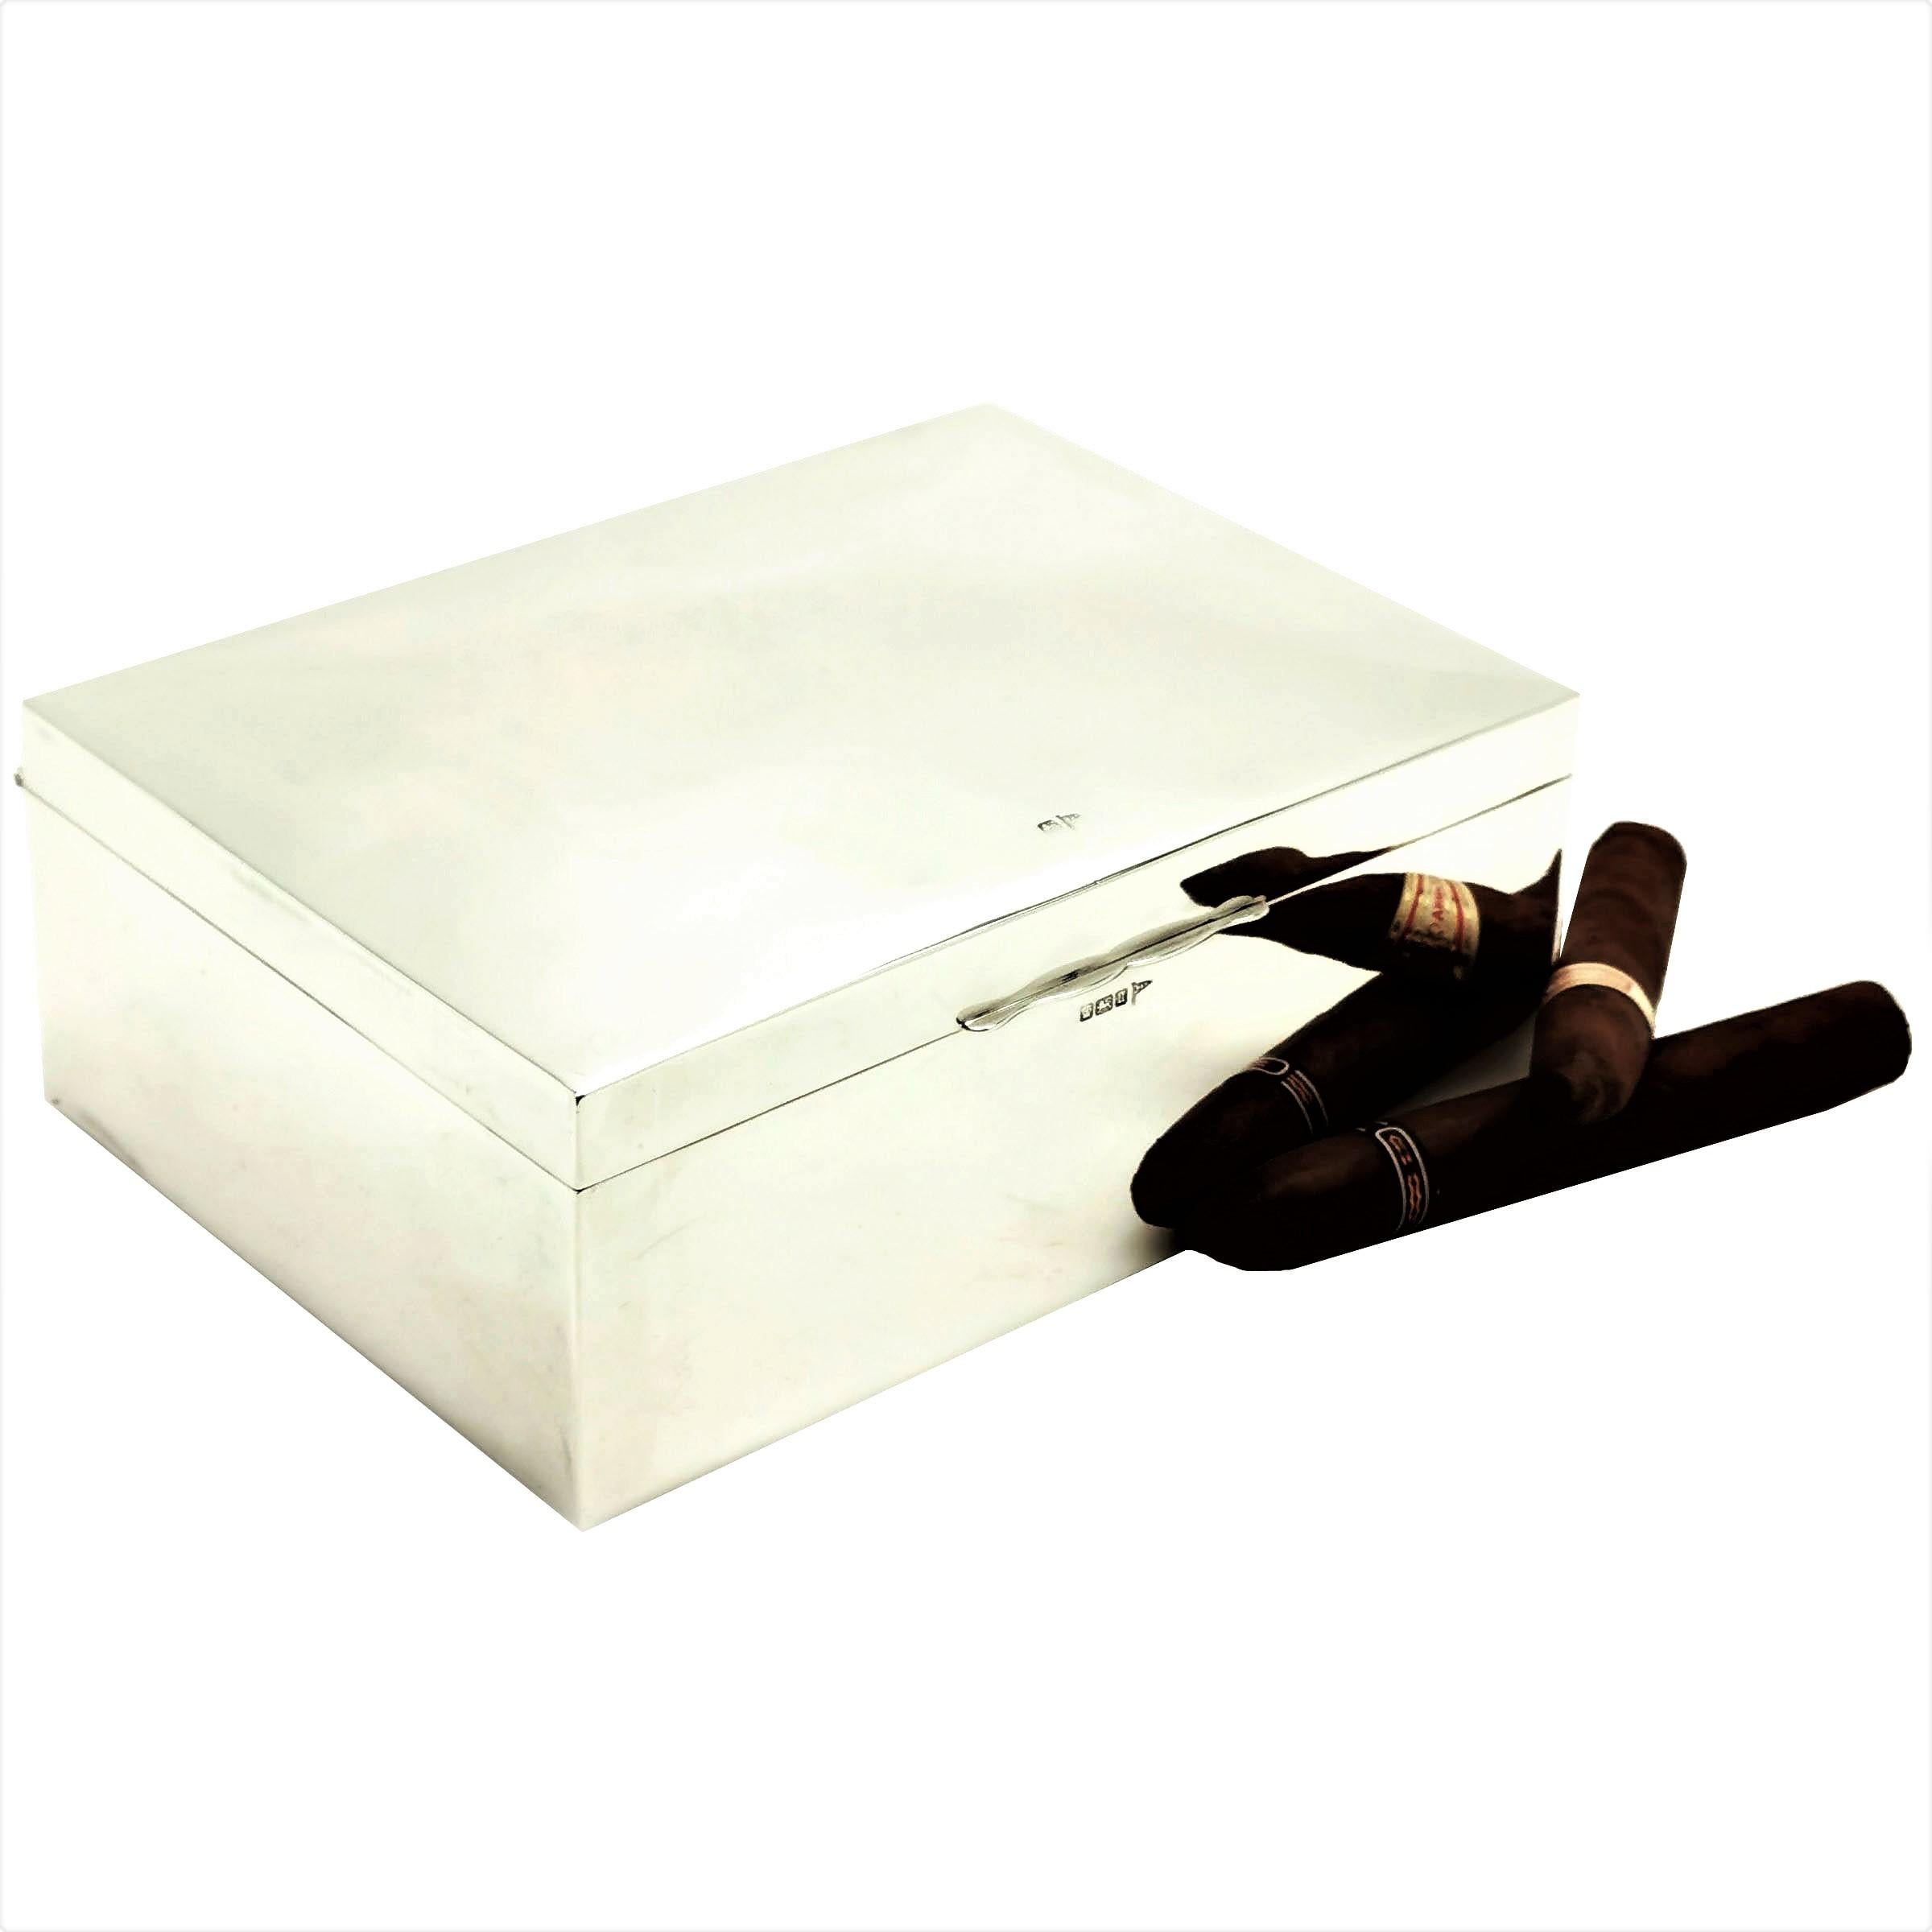 A classic antique solid Silver Cigar Box / Cigarette Box with a highly polished silver exterior. The interior of the Silver Box has a cedar wood lined base and the lid is gilded. The interior has a removable wooden partition.

Made in Sheffield,